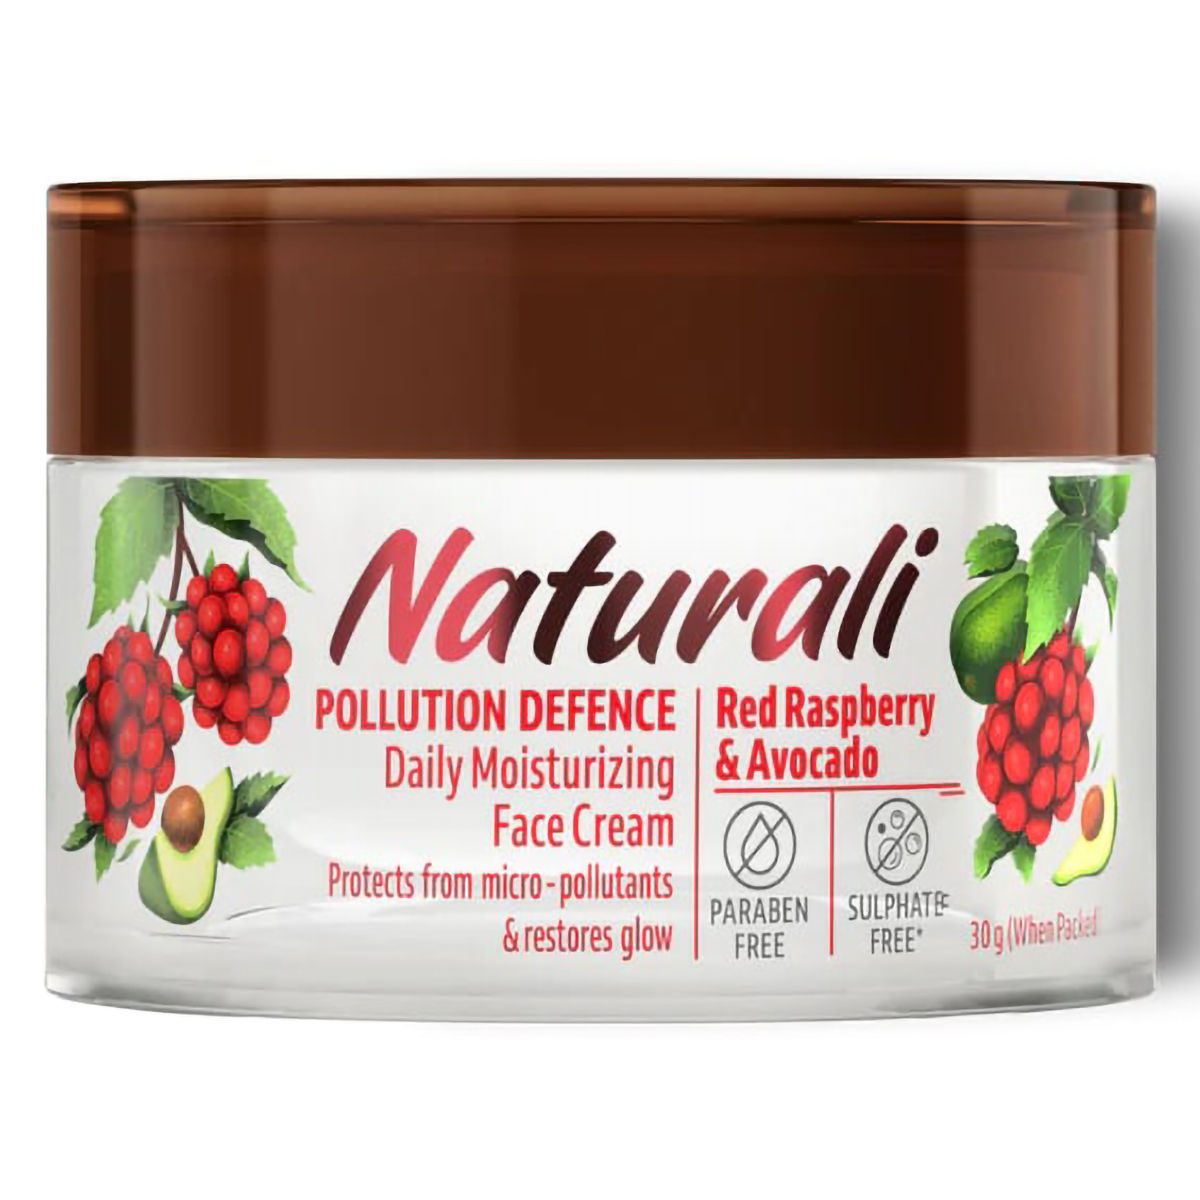 Buy Naturali Pollution Defence Daily Moisturizing Face Cream, 50 gm Online